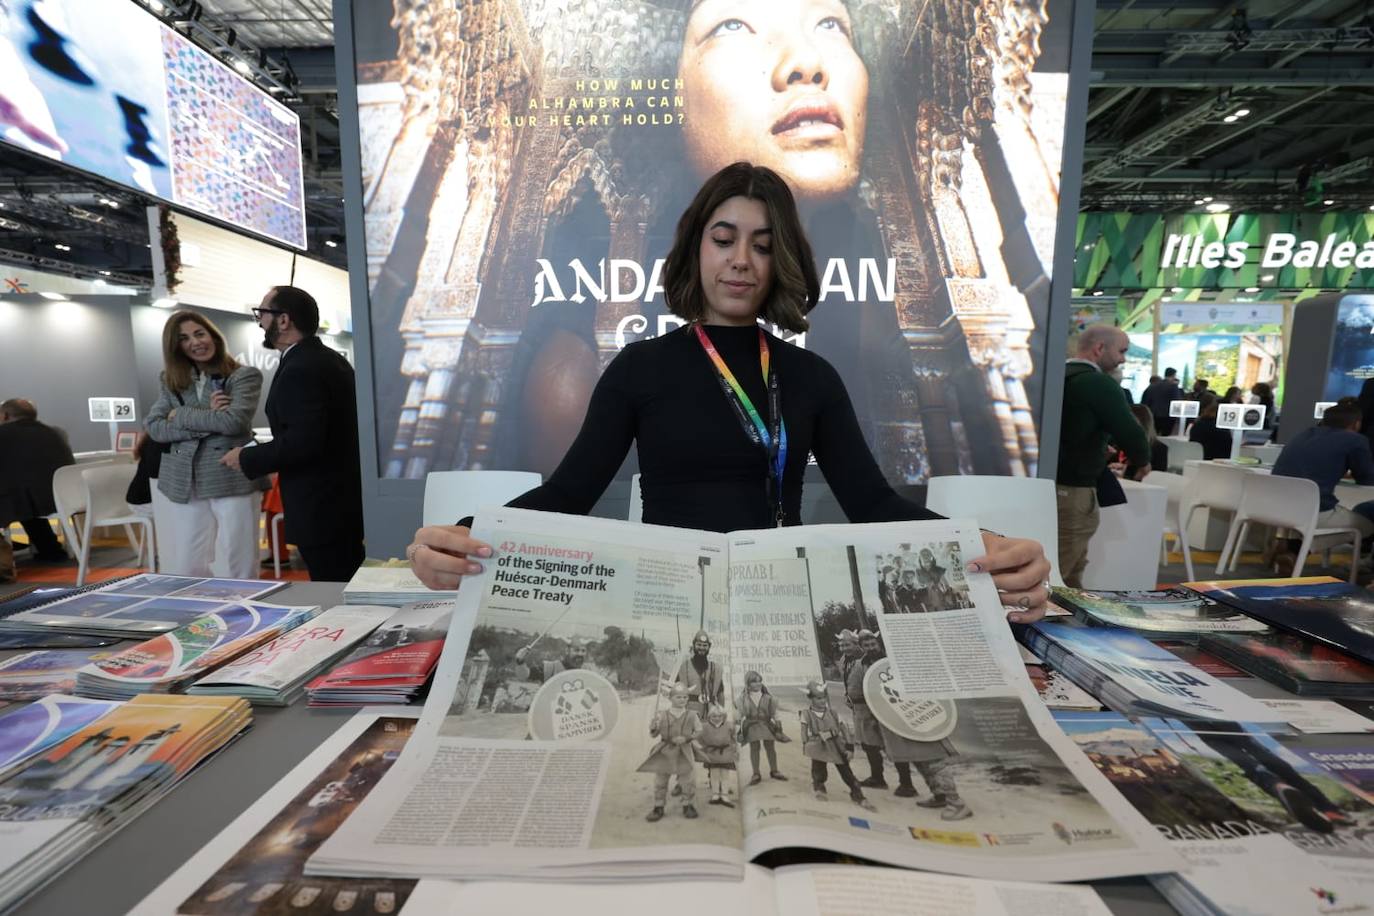 In pictures: World Travel Market in London - day two